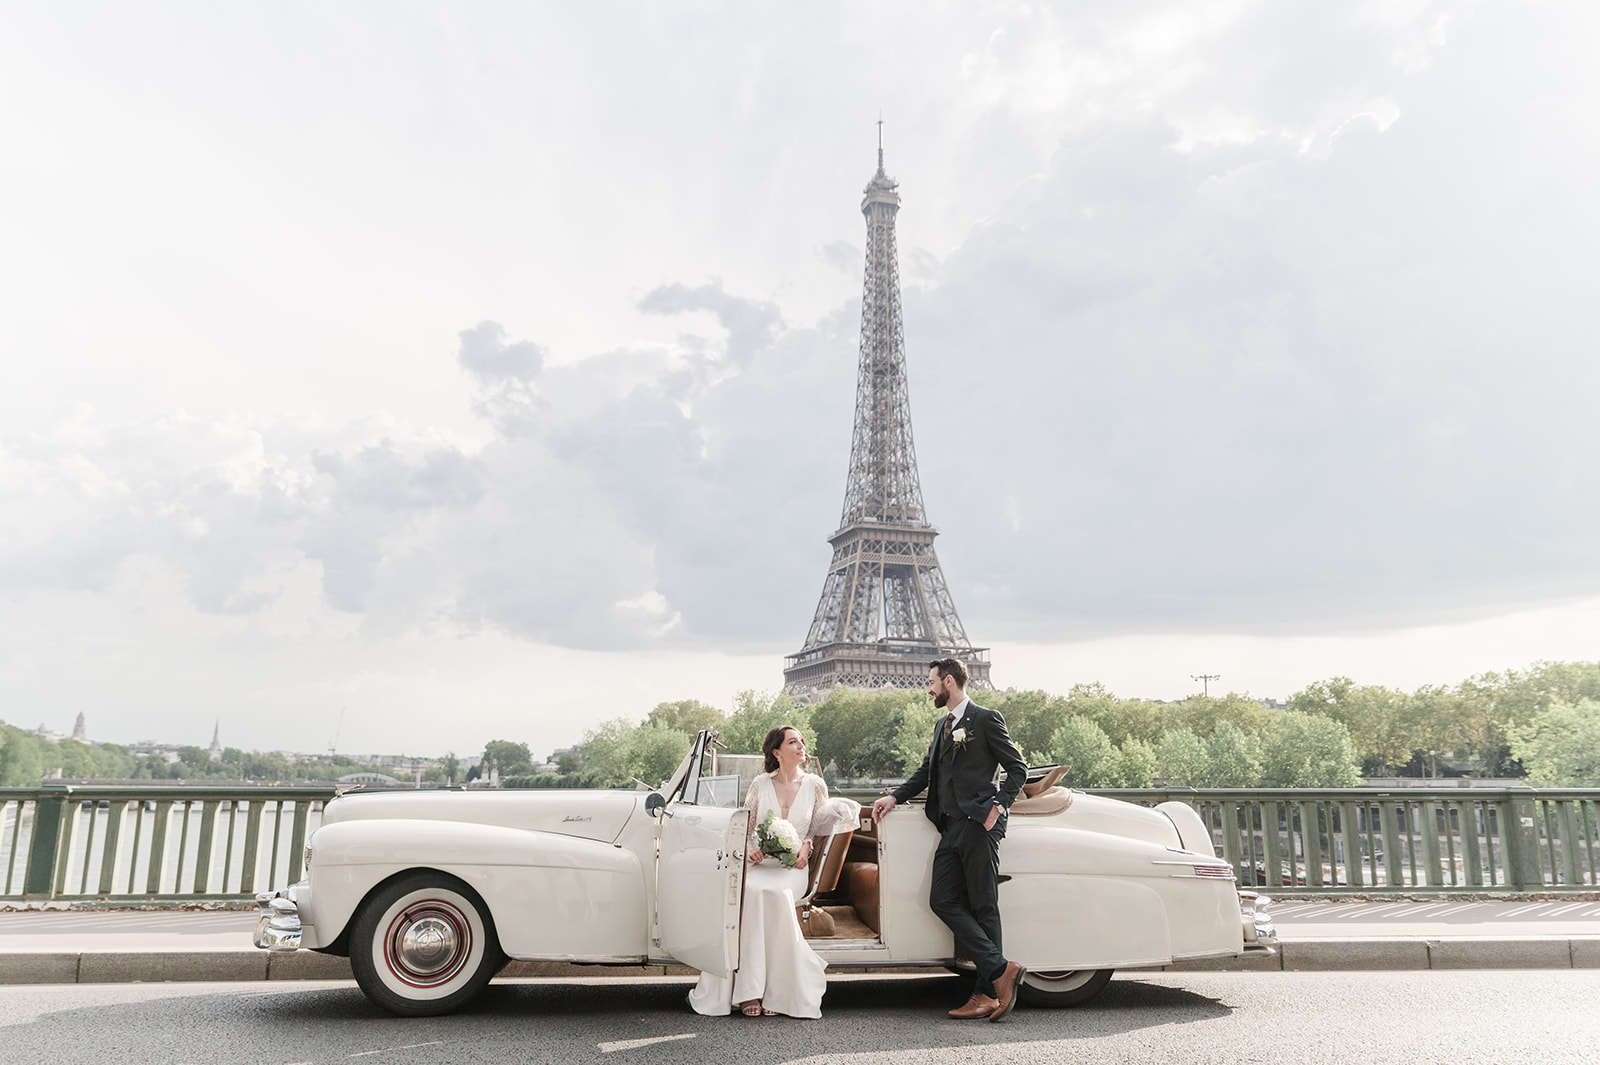 The bride and groom in a very relaxed pose with old vintage car over the river with the Eiffel